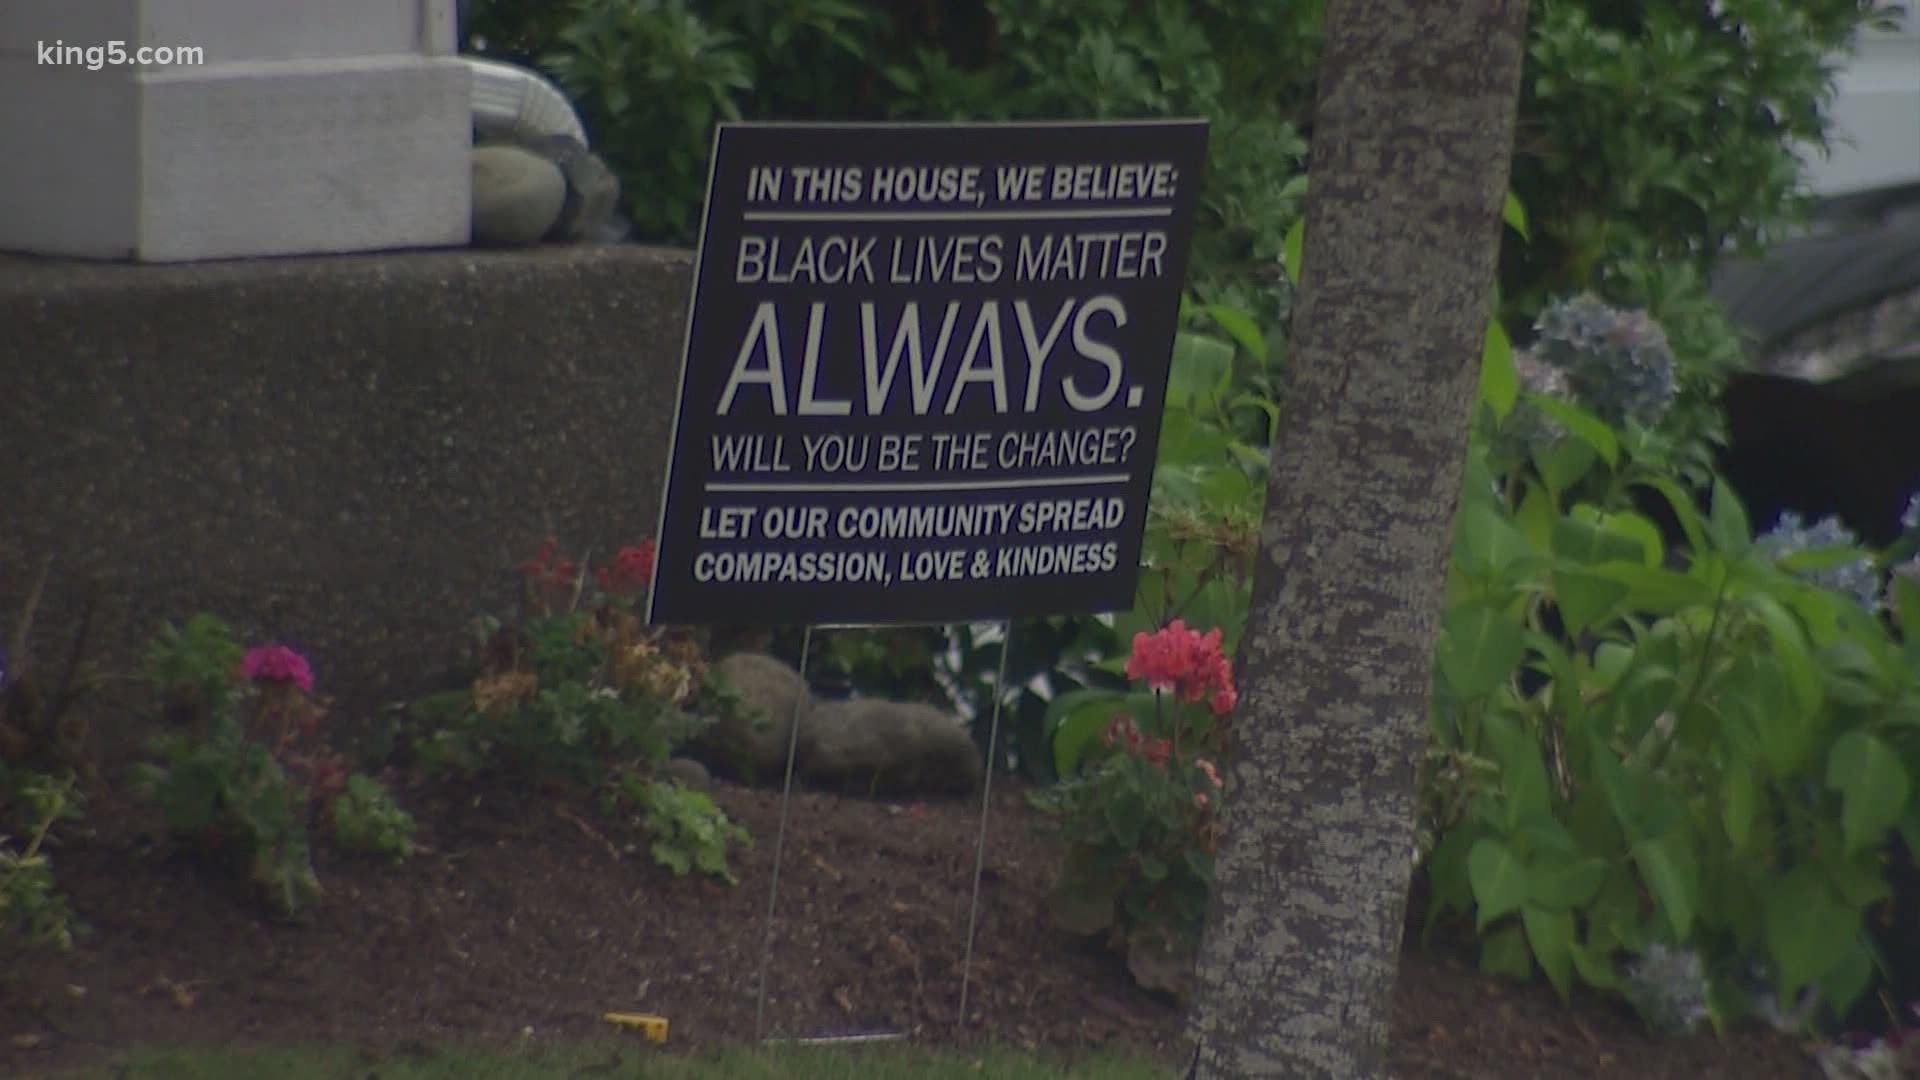 Some homeowners in the Snoqualmie Ridge community say their homeowner's association is unfairly enforcing a sign policy after Black Lives Matter signs were put up.